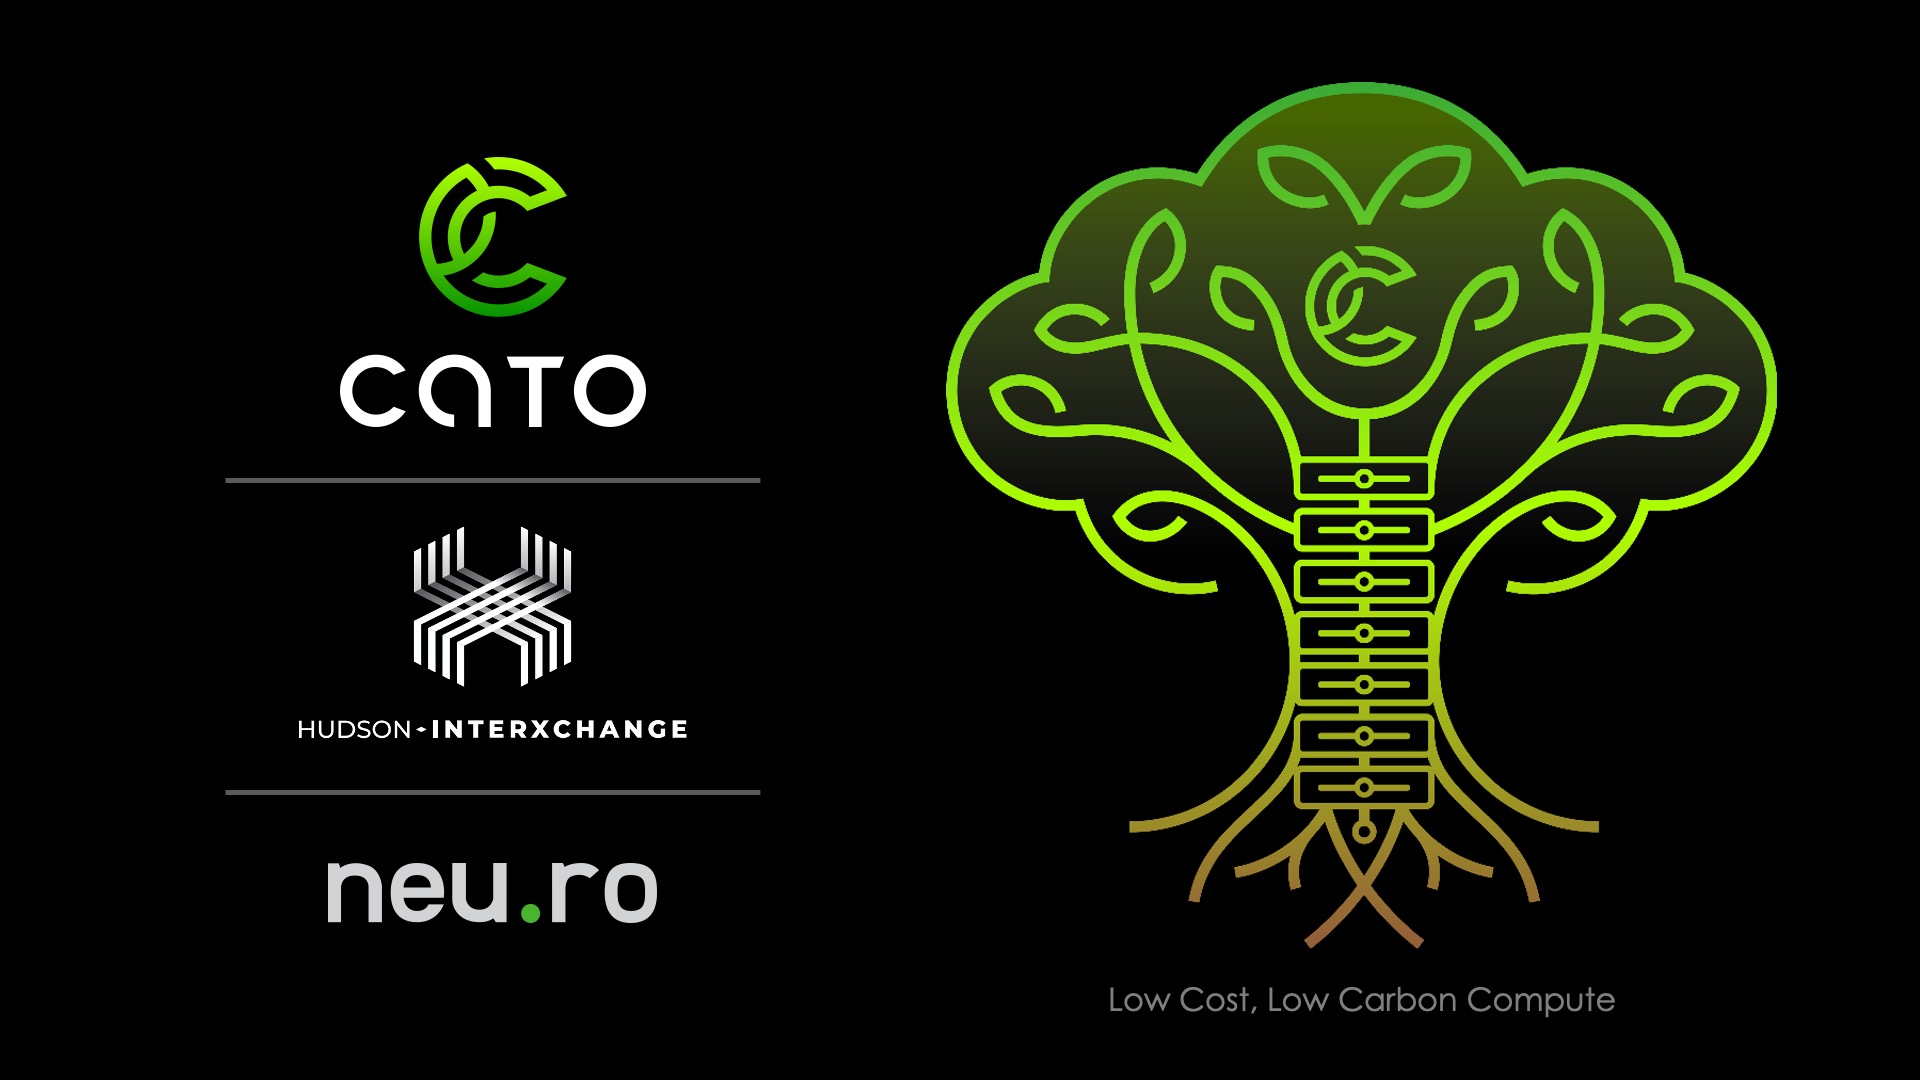 Cato Digital to Deploy Low Cost, Low Carbon Bare Metal at Hudson IX; Neu.ro to be First Partner Running MLOps/AI Platform Enabling Customized GPT-Like Services